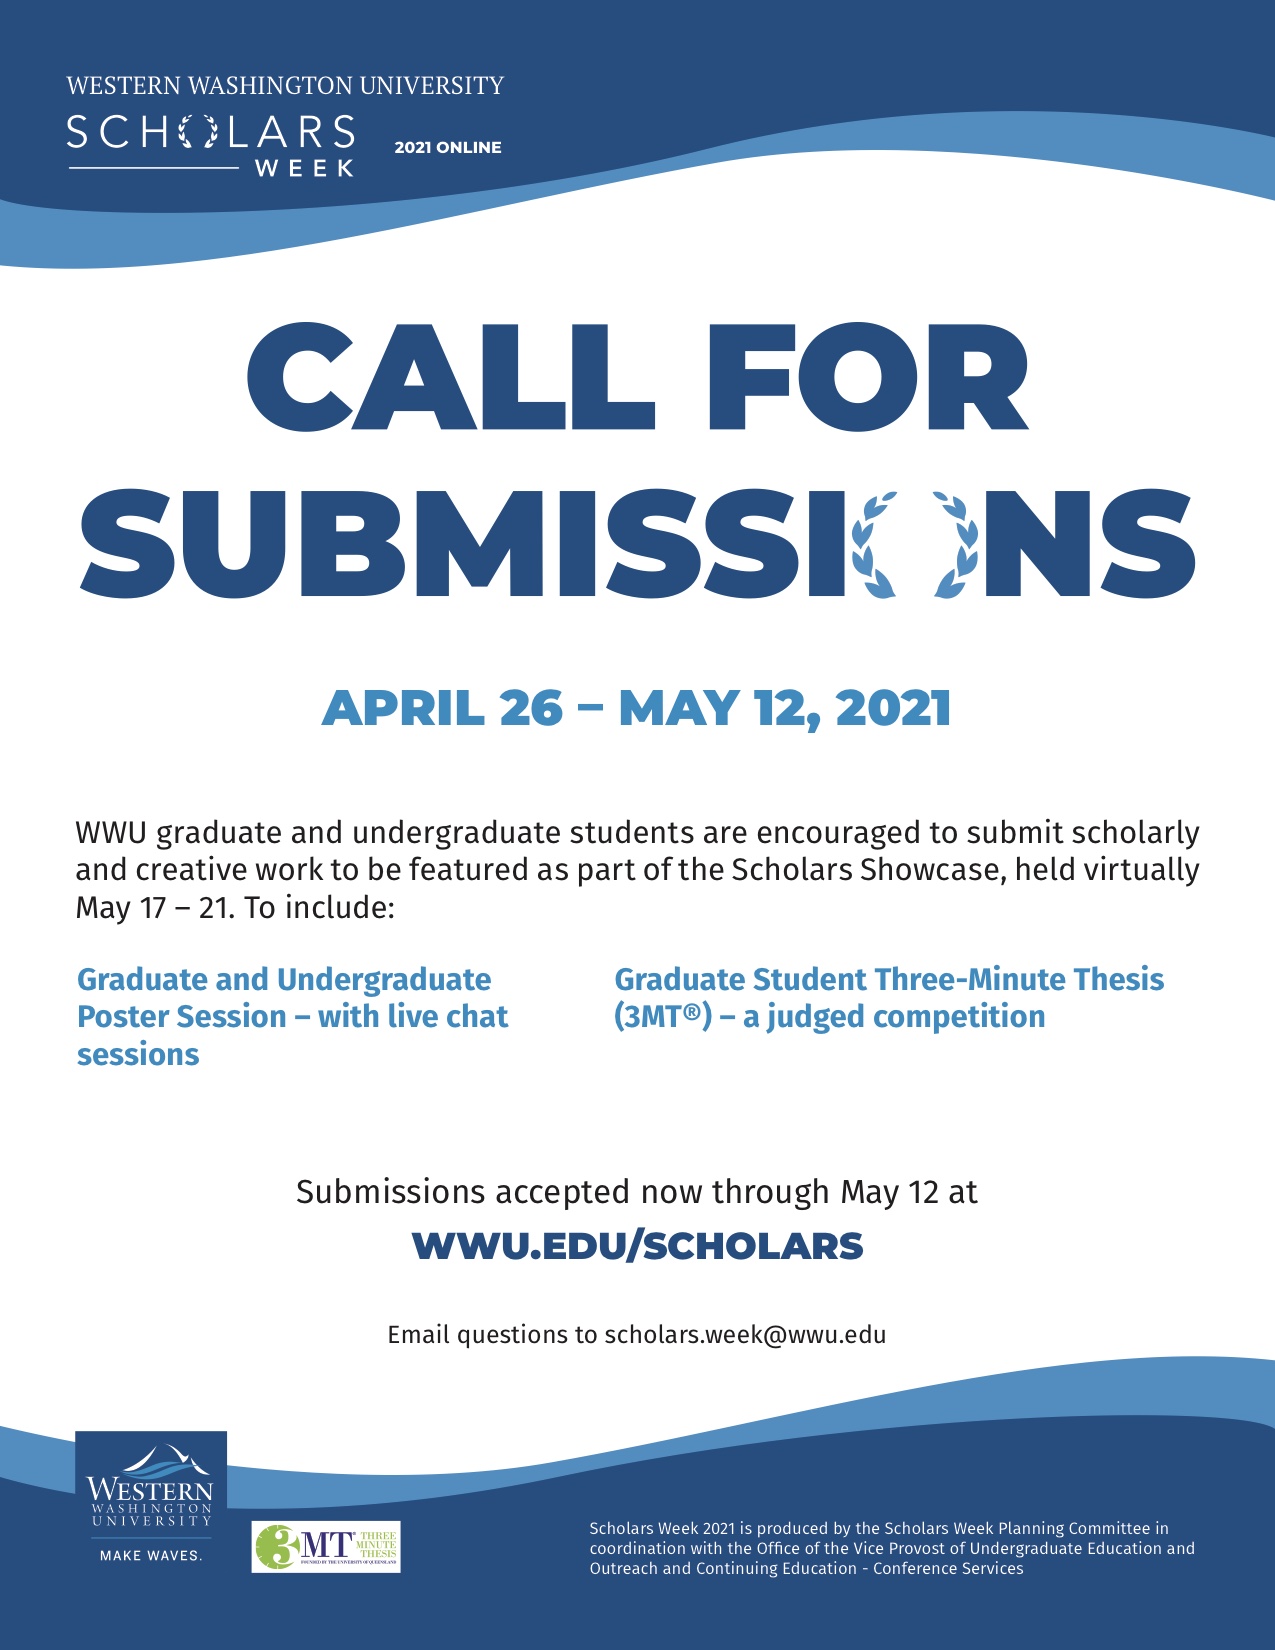 Scholars Week call for submissions flyer, seeking poster session submissions from graduate and undergraduate students, in addition to three-minute thesis competition submissions from graduate students, for the Scholars Showcase to be held online May 17 through May 21.